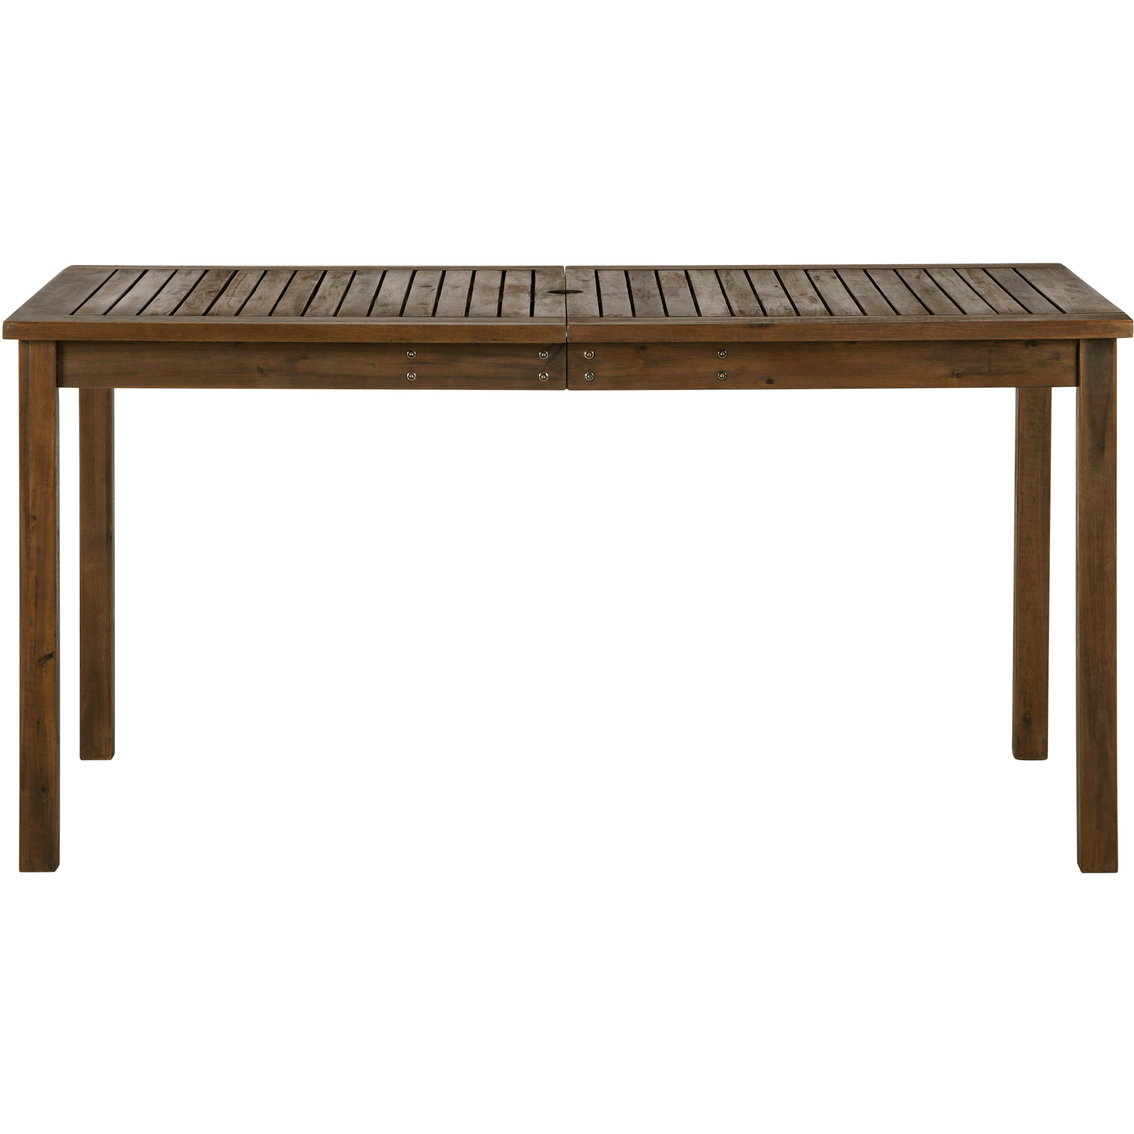 Walker Edison 60 in. Patio Modern Dining Table - Image 2 of 4